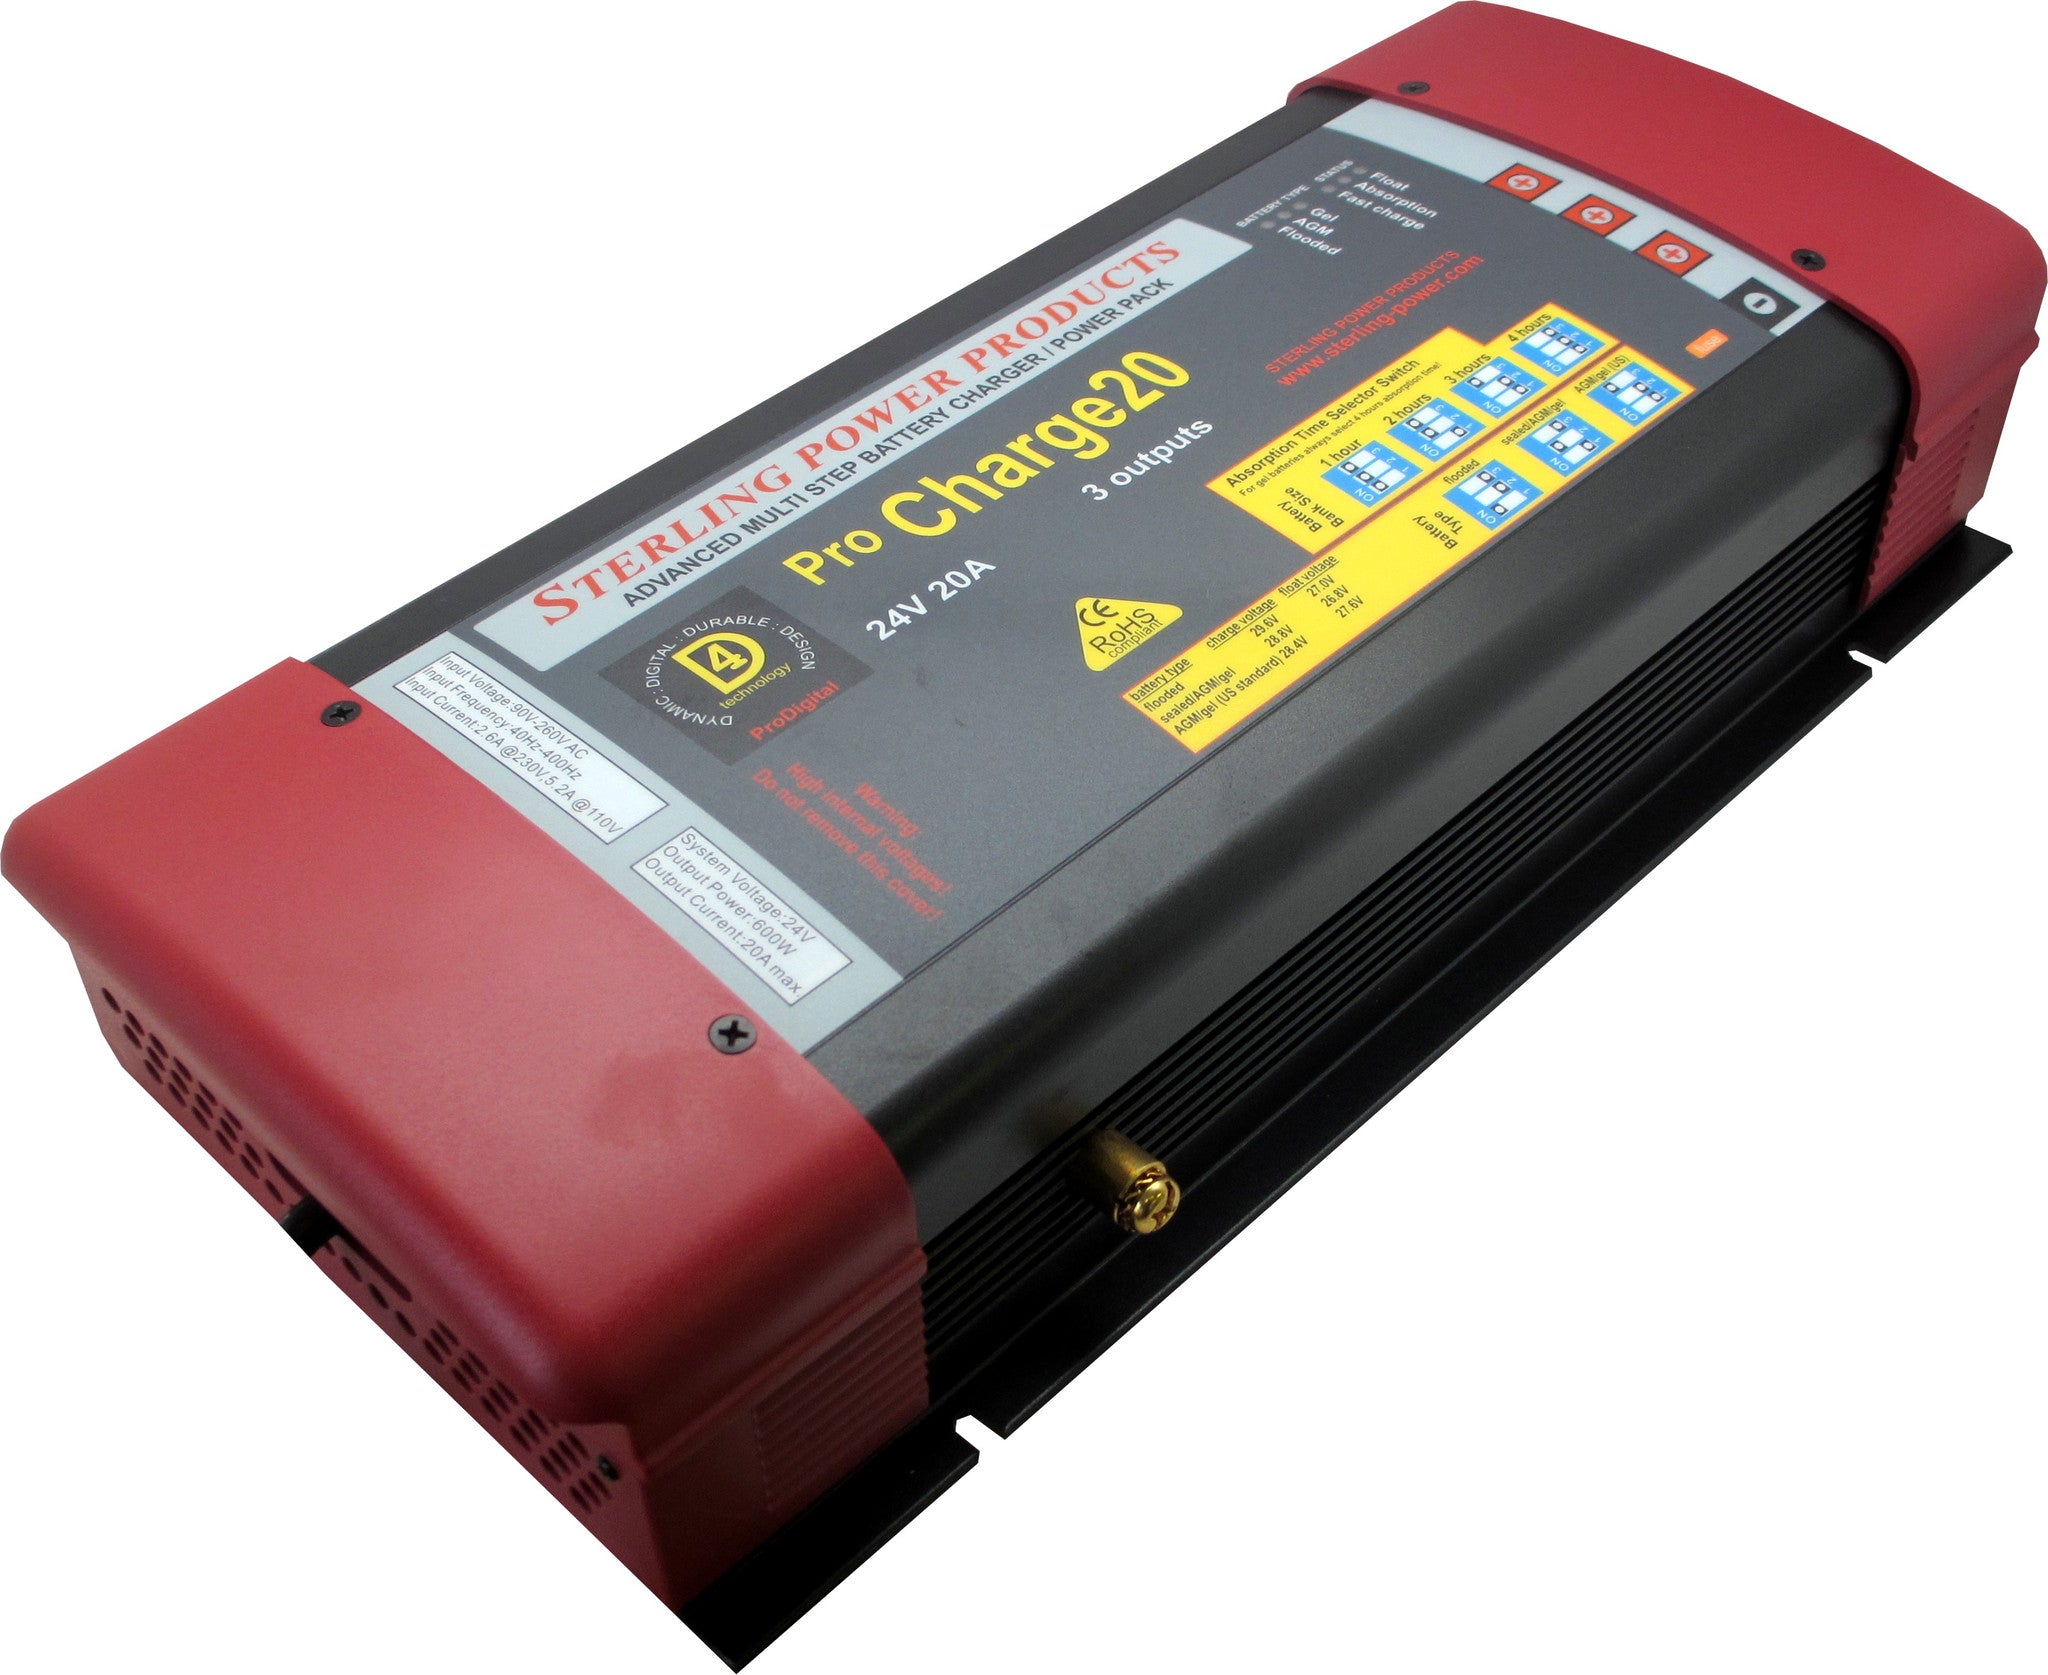 Pro Charge C 24v a Ac To Dc Battery Charger 30 Days Warranty Sterling Power Products